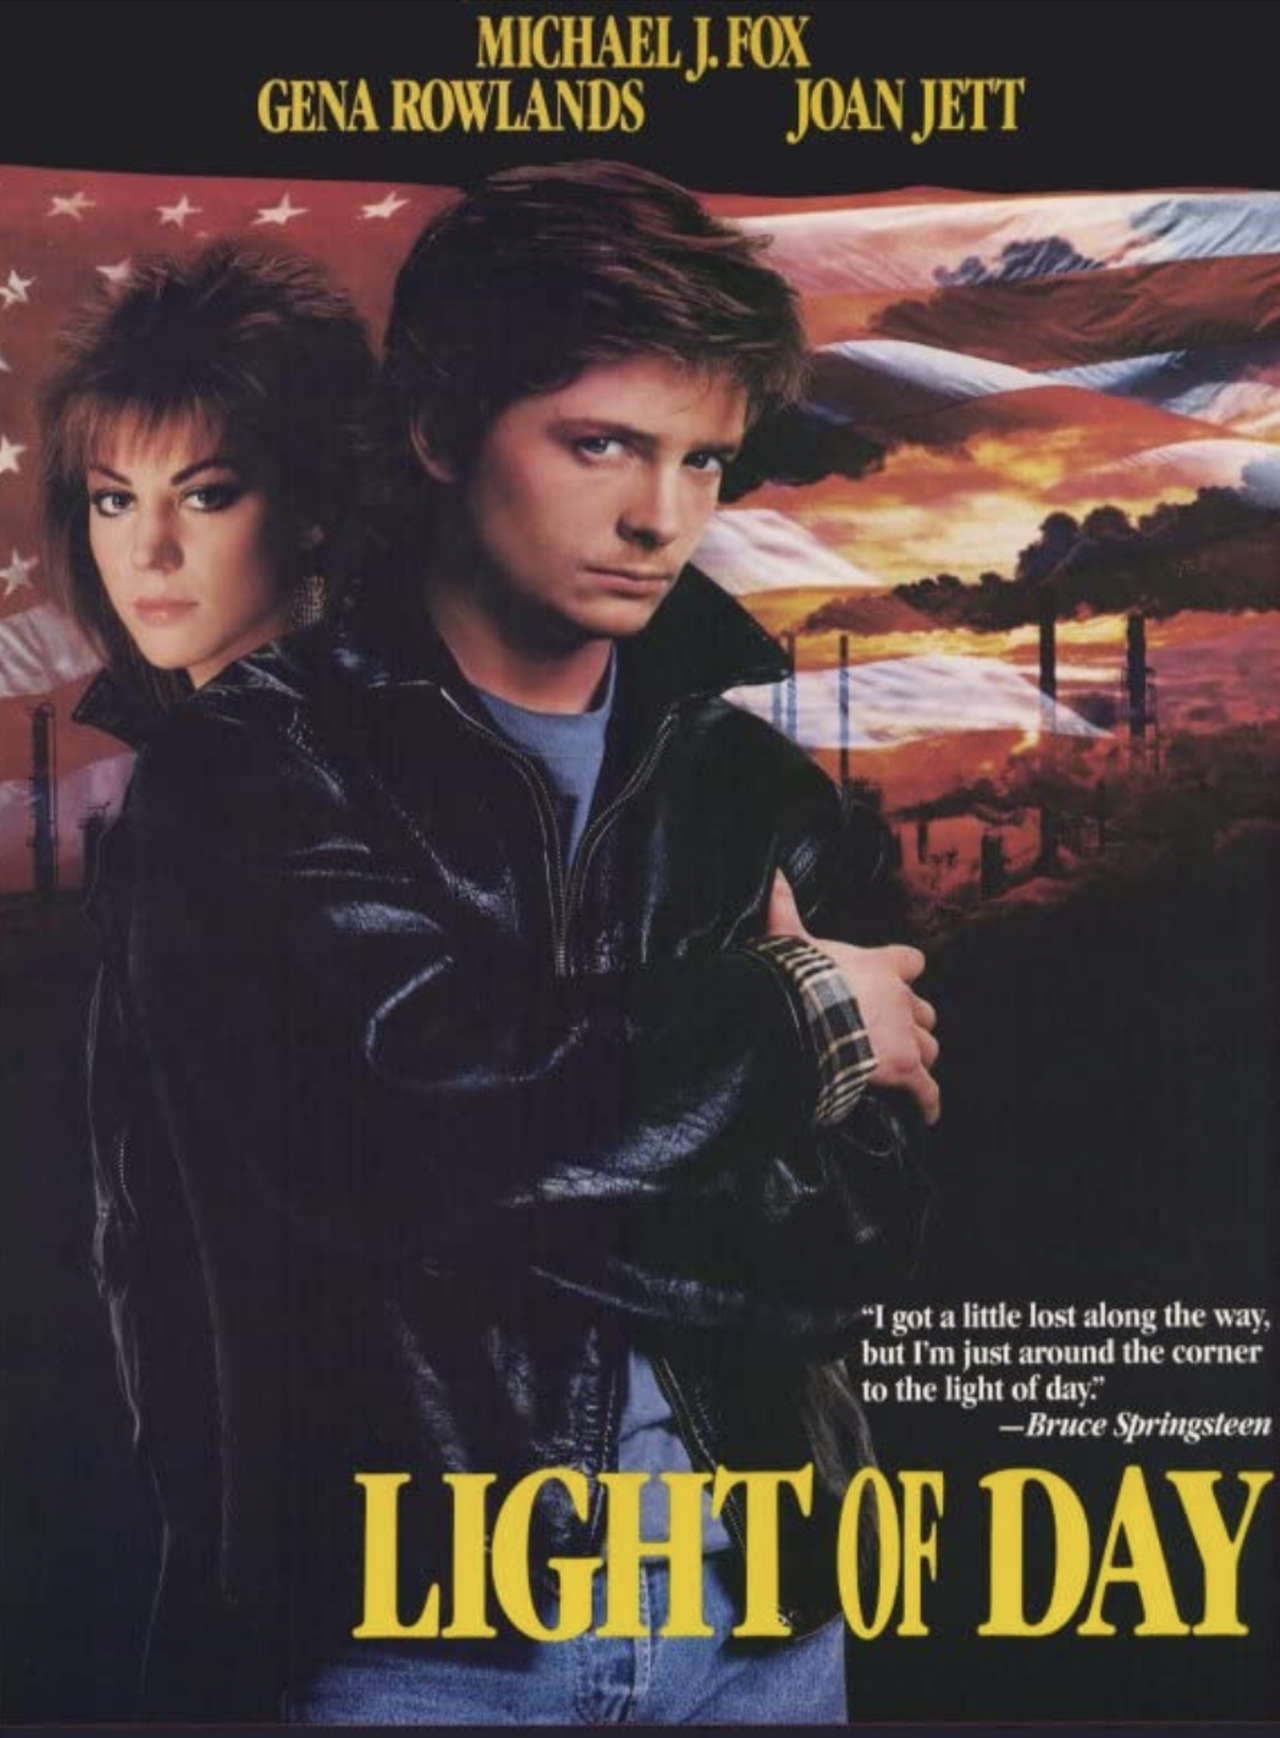   Light Of Day  (1987) 
This 1987 film stars Michael J. Fox and Joan Jett, and they actually use Cleveland as the location in the film as opposed to dressing up Cleveland to look like somewhere else. It's about a pair of siblings who are deciding whether to tour the country with their rock band or stay home in Cleveland to support their family. Fox and Jett can be seen playing a gig at the old Euclid Tavern.